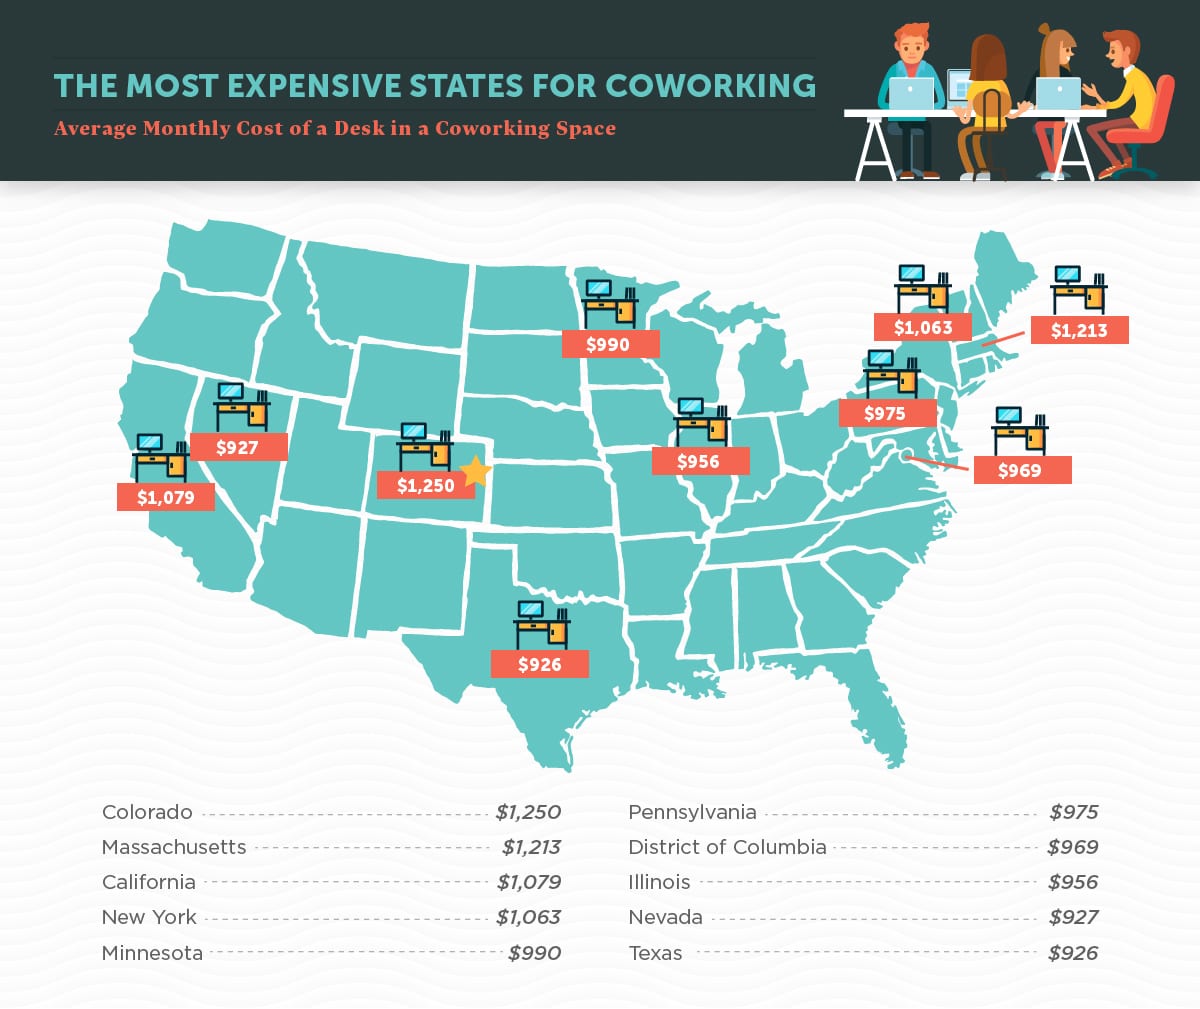 The most expensive states for coworking.